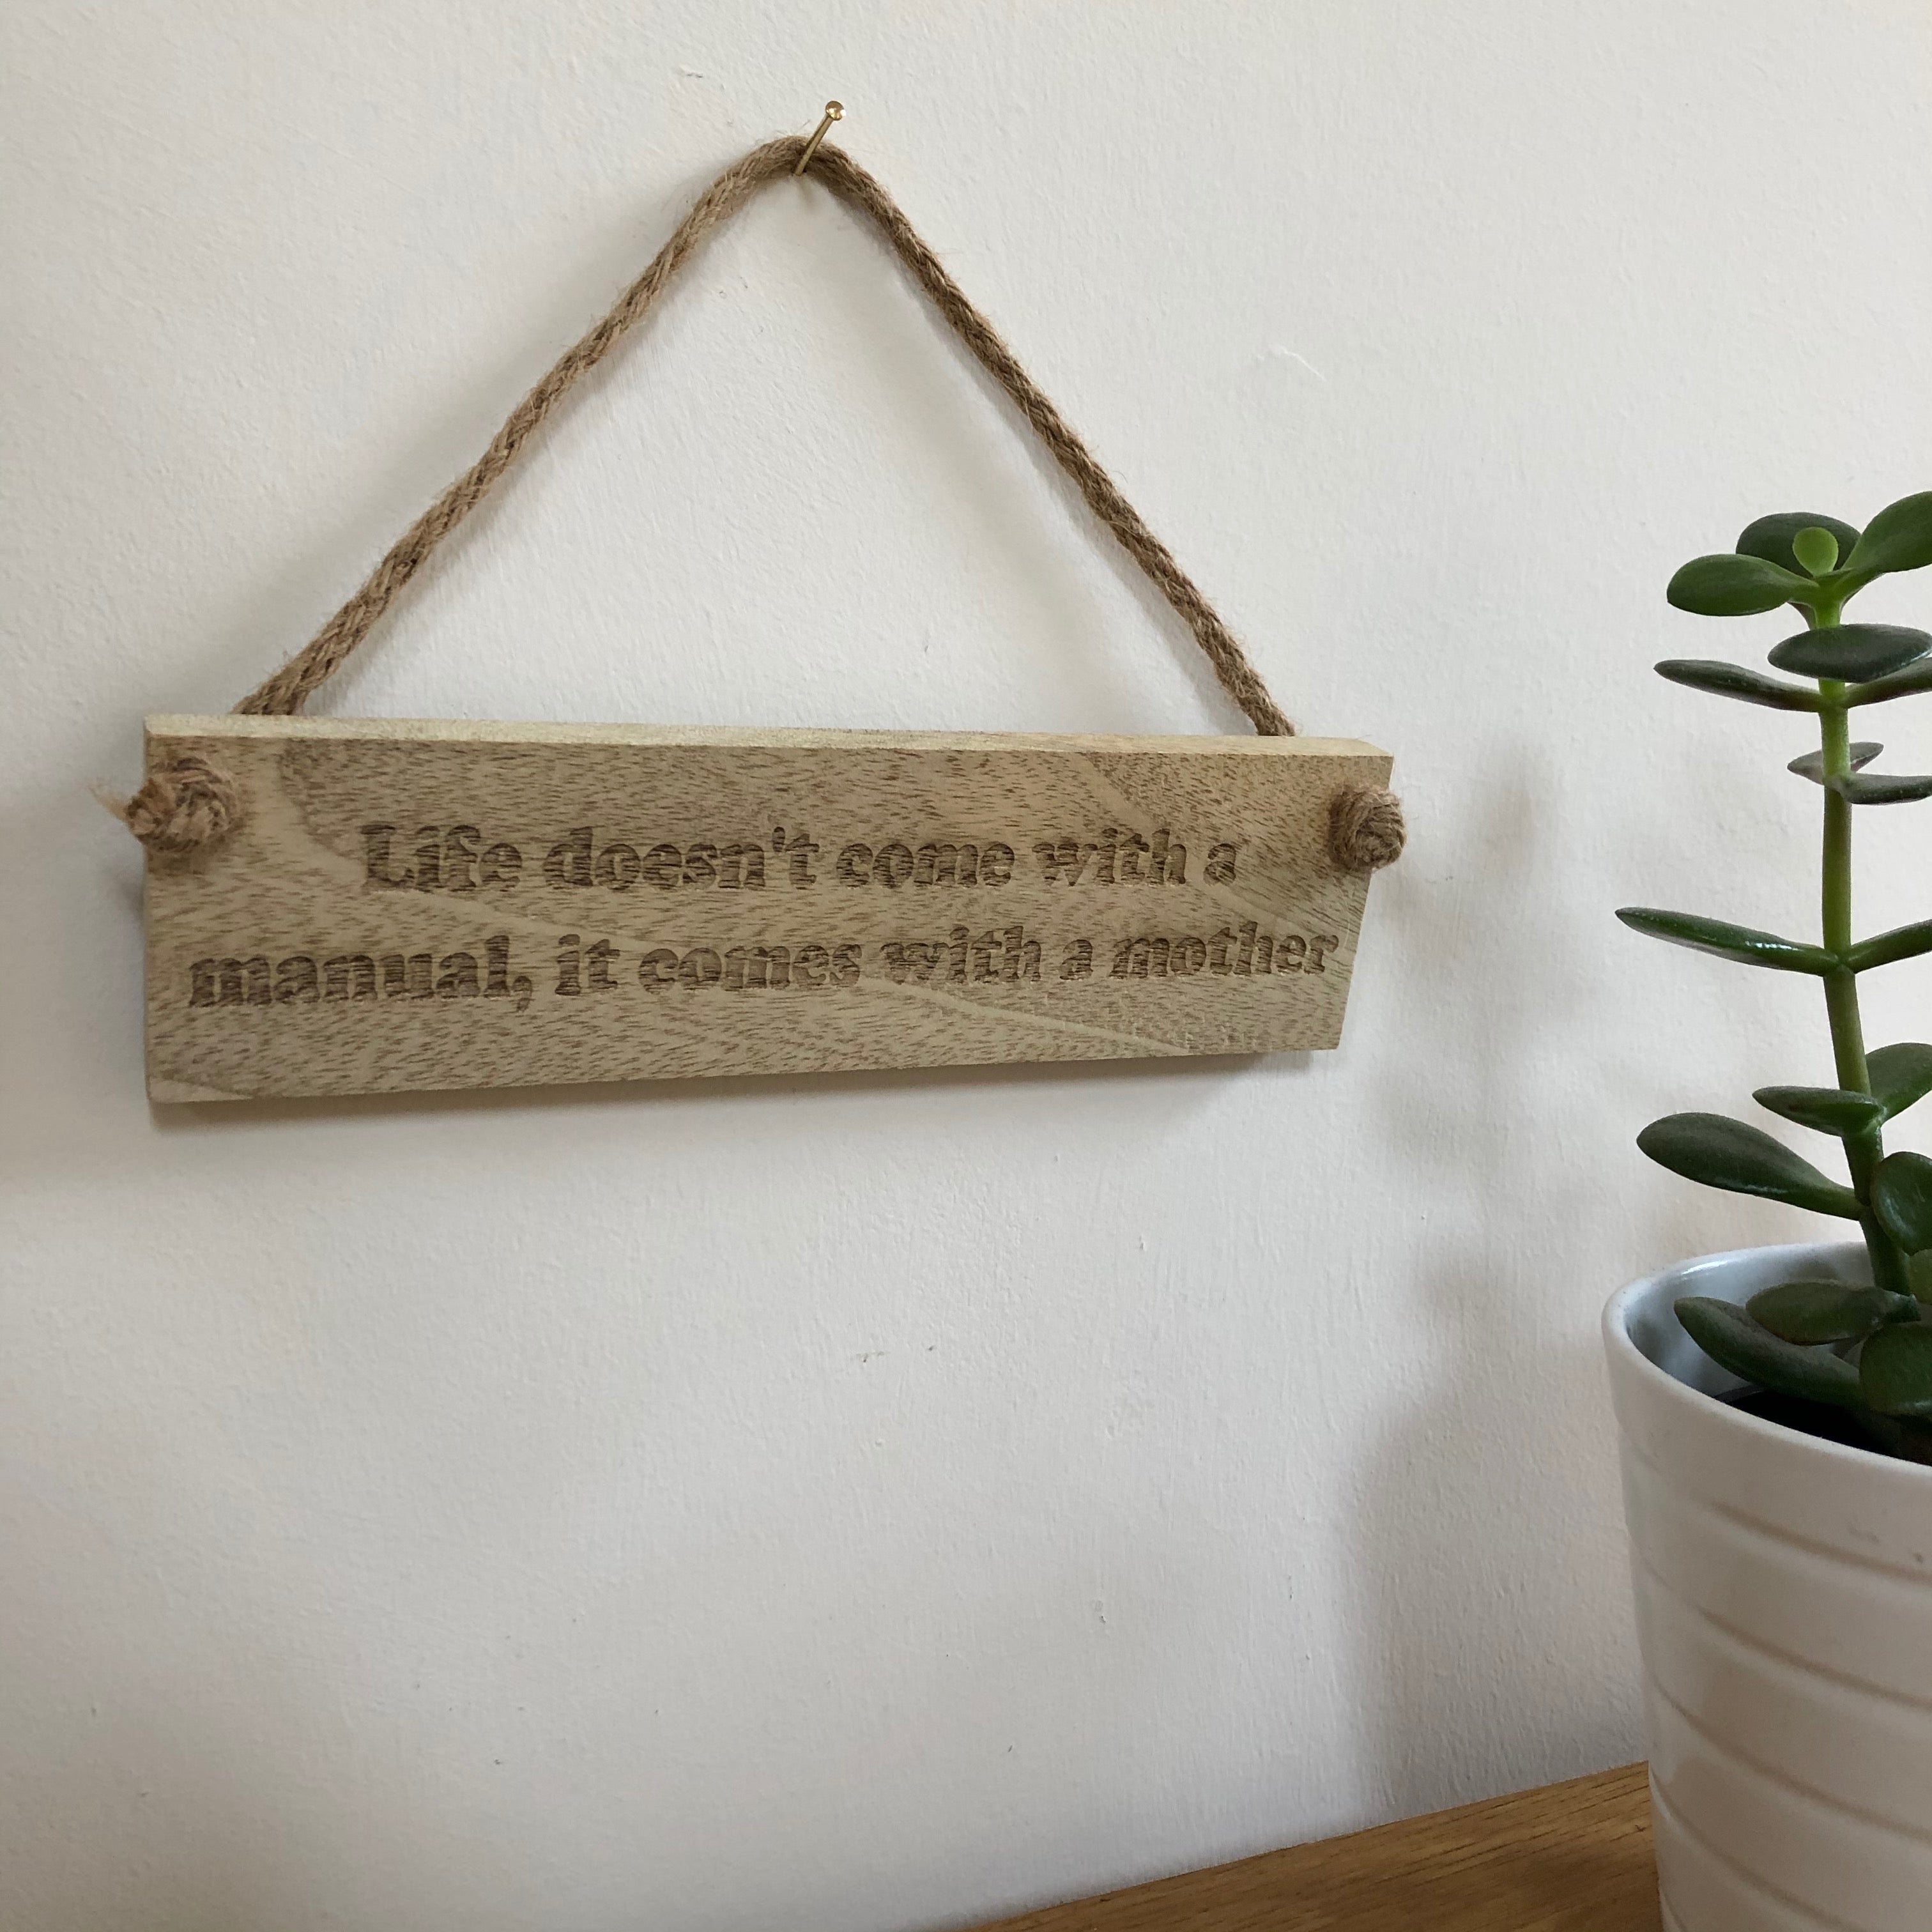 Wooden hanging plaque - life manual - hanging